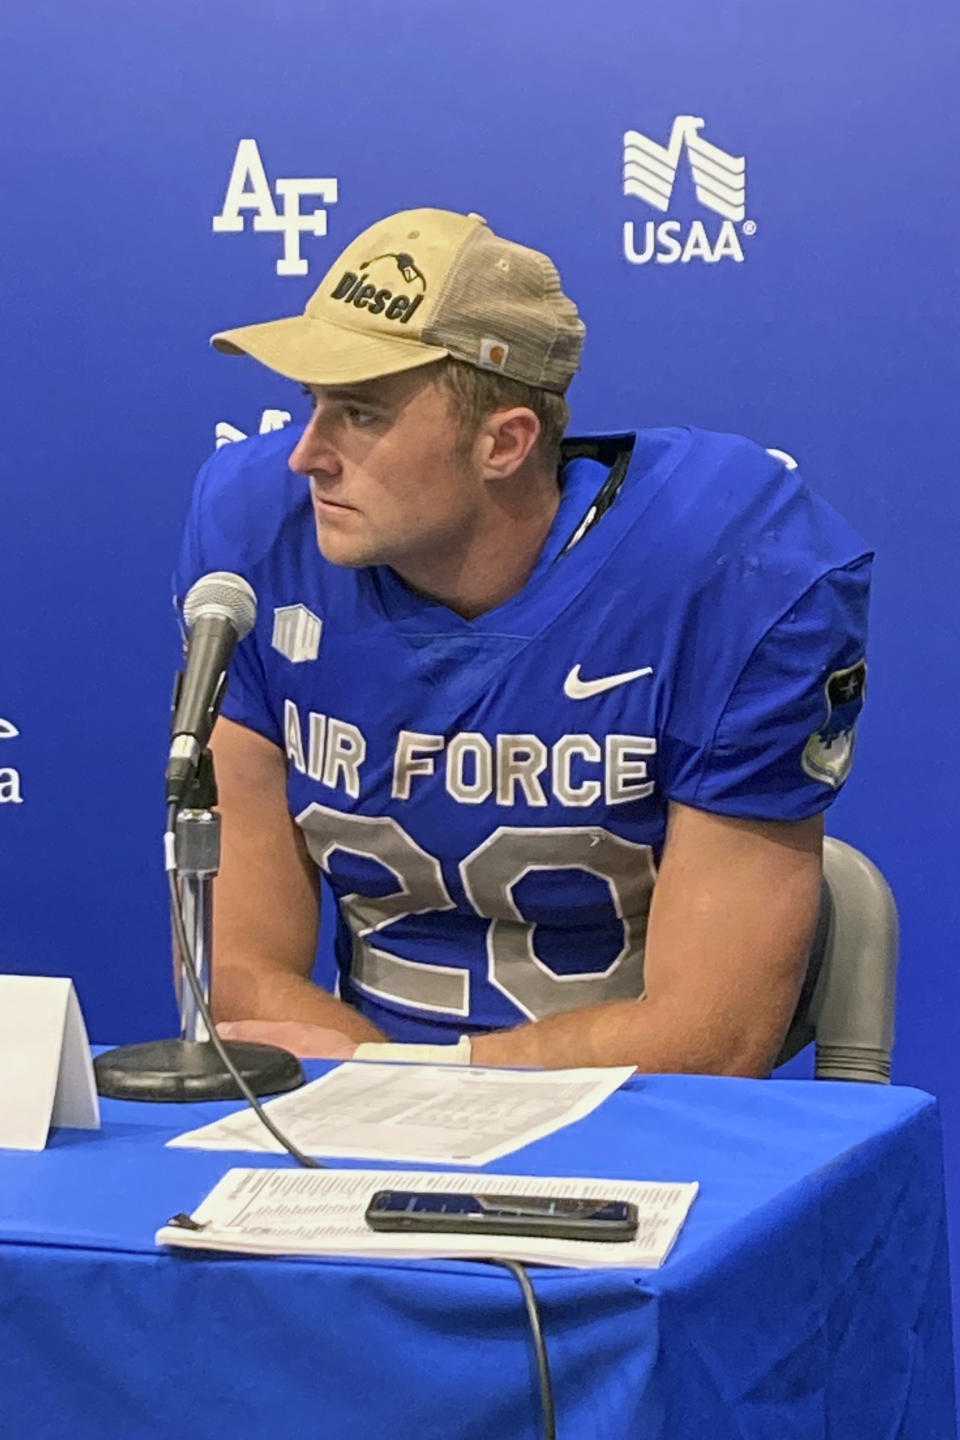 Air Force NCAA college football fullback Brad Roberts speaks during a press conference at Air Force Academy, Colo., Sept. 10, 2022. The offensive linemen for Air Force call themselves “Diesel,” a nickname invented a few seasons ago to personify the grit and toughness they use to help power the Falcons. All starting offensive linemen are inducted. But there can also be honorary “Diesel,” members, those who demonstrate the qualities of being a lineman. Like fullback Brad Roberts, who earned a hat last season. (AP Photo/Pat Graham)